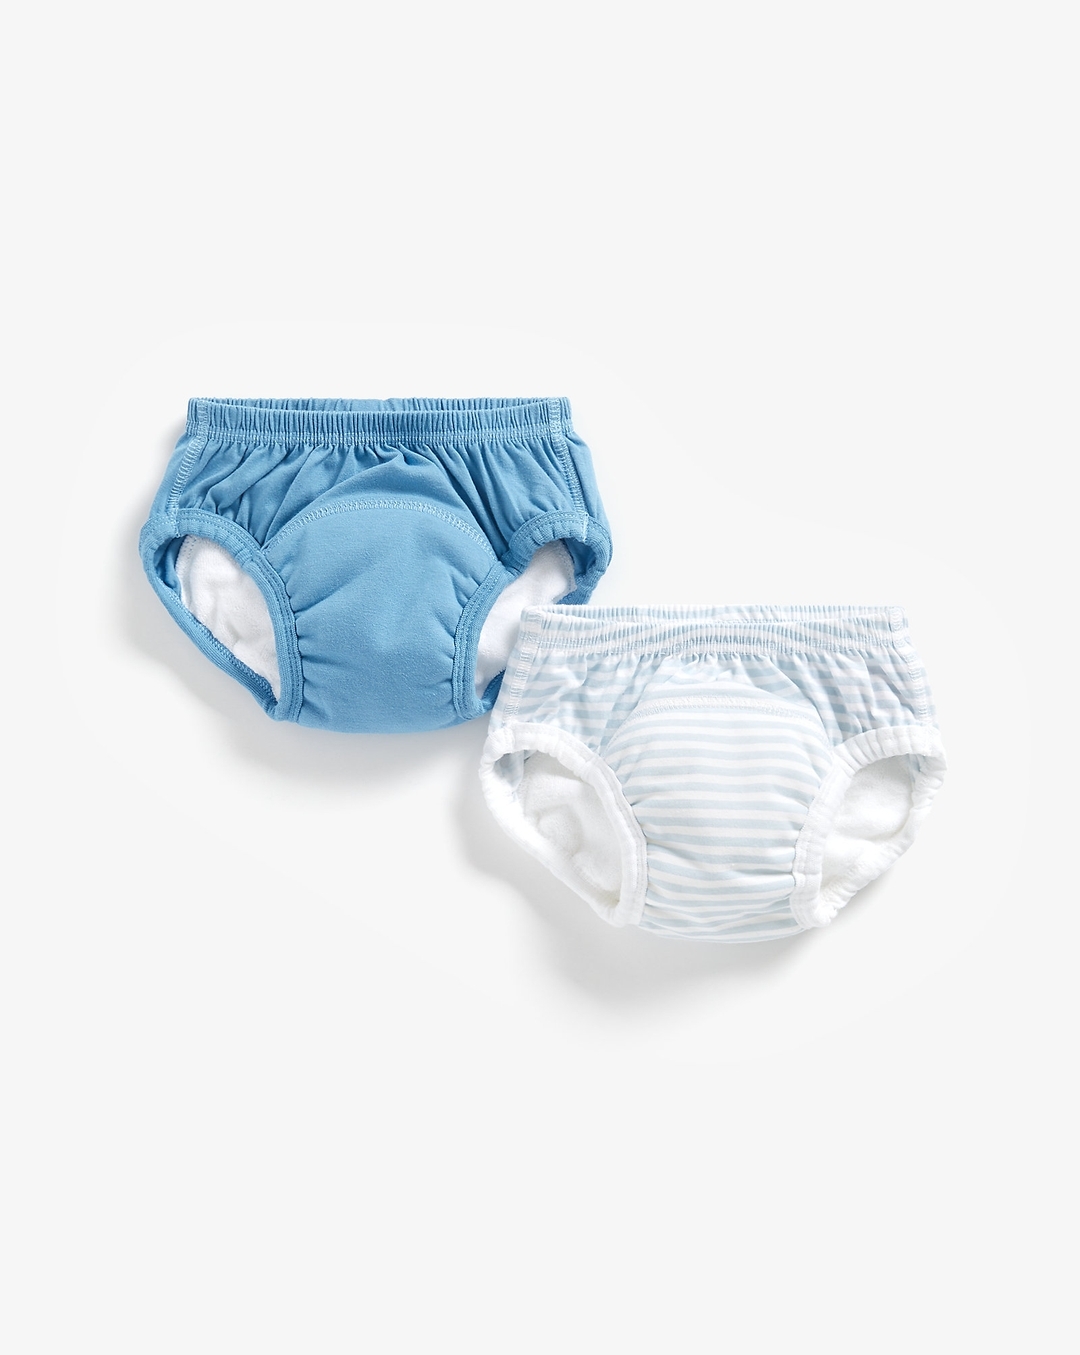 Ahc Zikku Potty Training Pants for Baby Pull Up Design Reusable Blue Online  in India, Buy at Best Price from Firstcry.com - 14086568